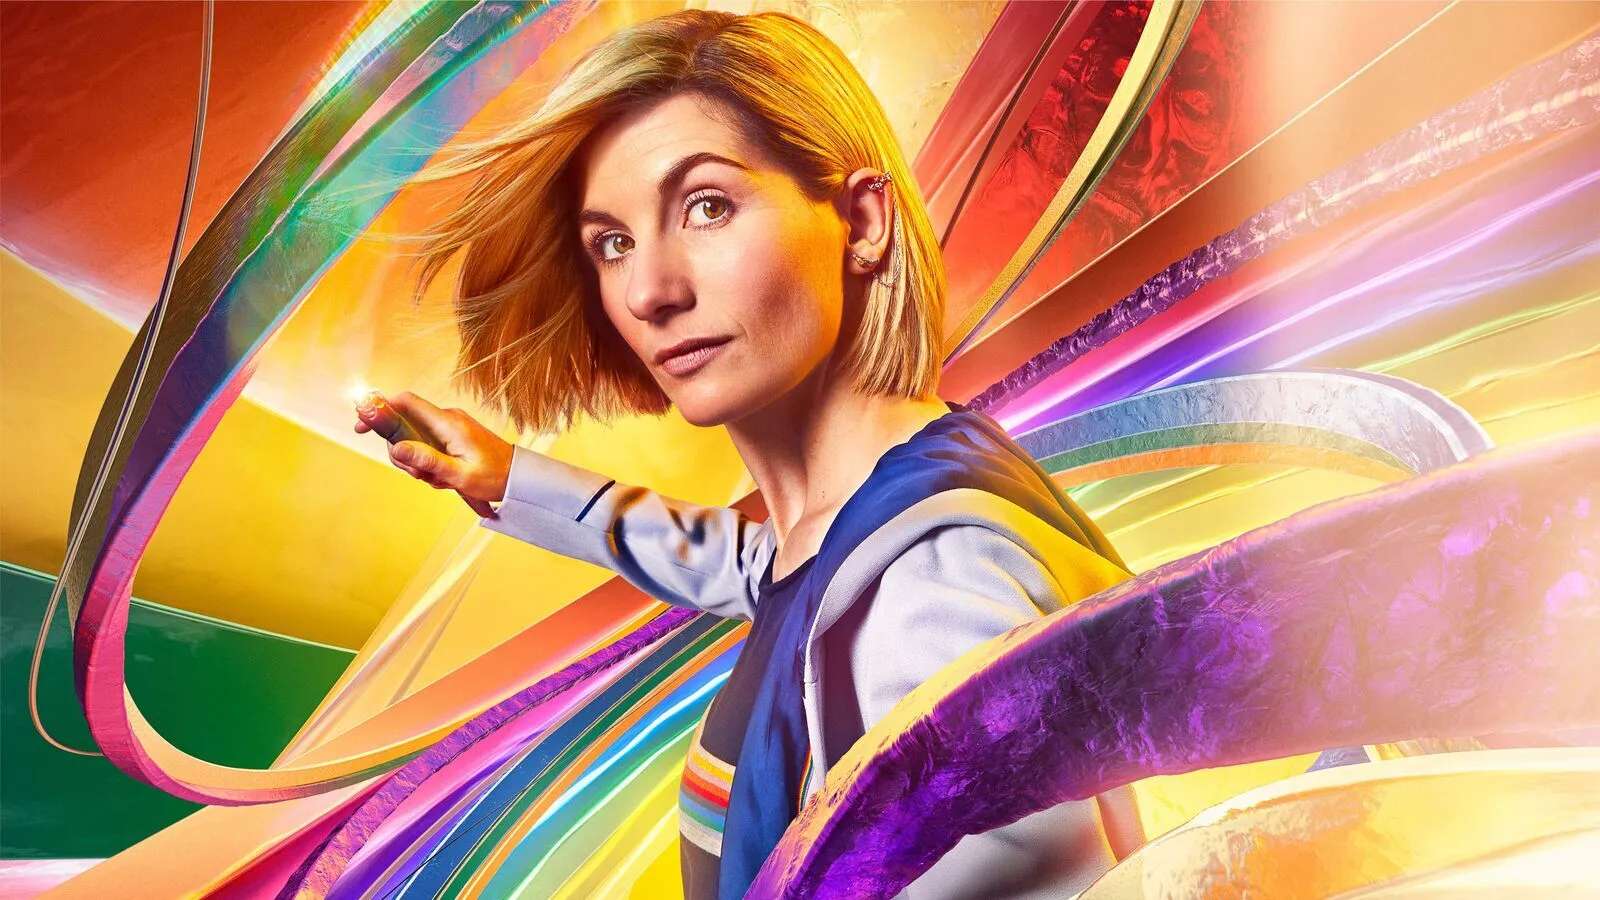 Jodie Whittaker as the Thirteenth Doctor in Doctor Who